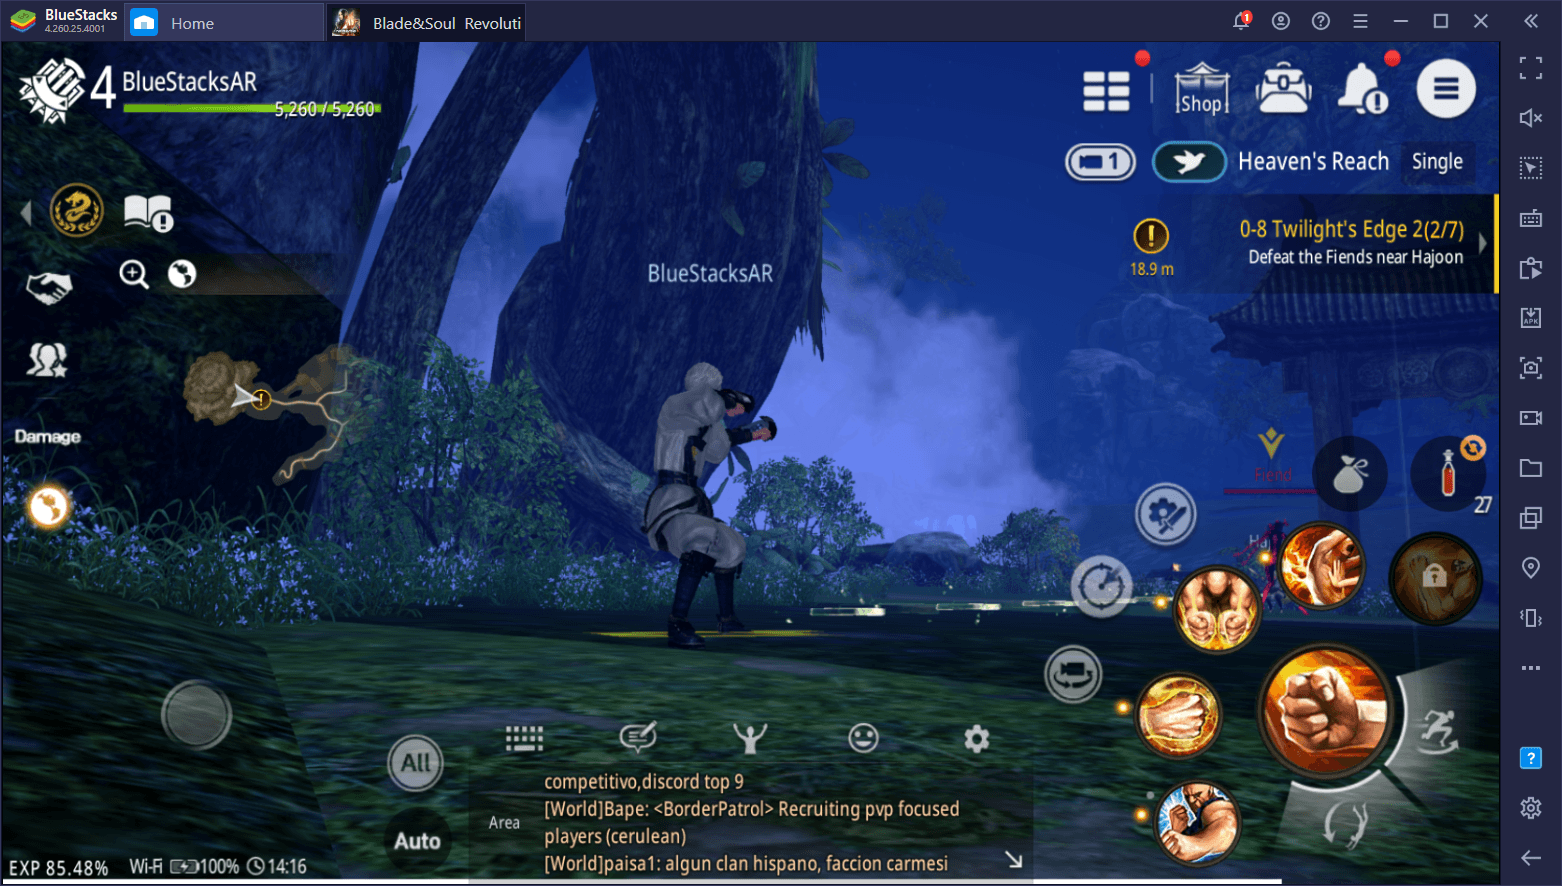 Blade & Soul Revolution on PC - How to Get the Most Out of Your Game When Playing on BlueStacks